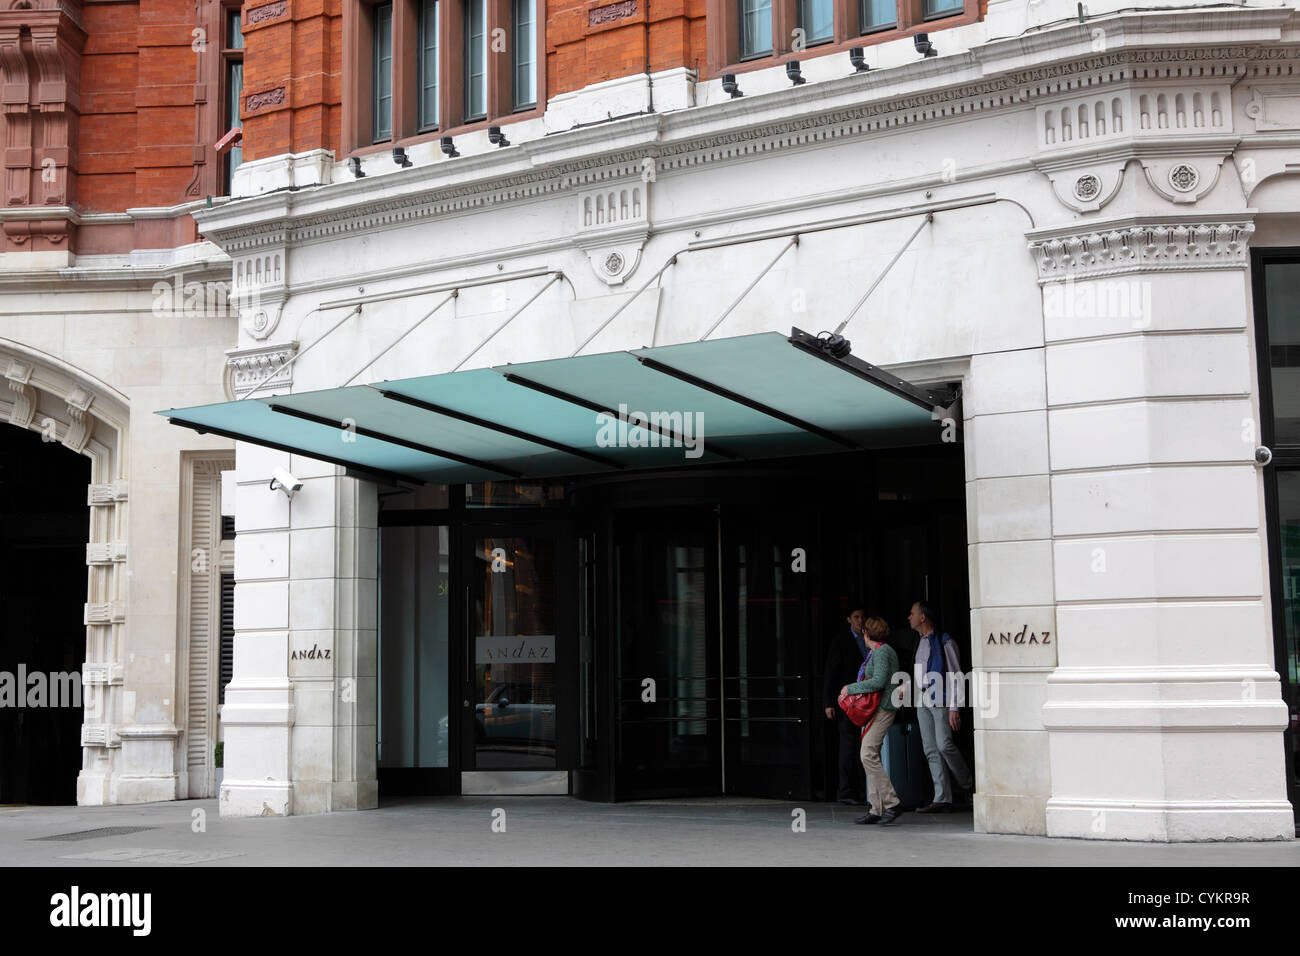 Situated in the City of London is the Andaz Hotel,it`s main entrance is viewed here. Stock Photo